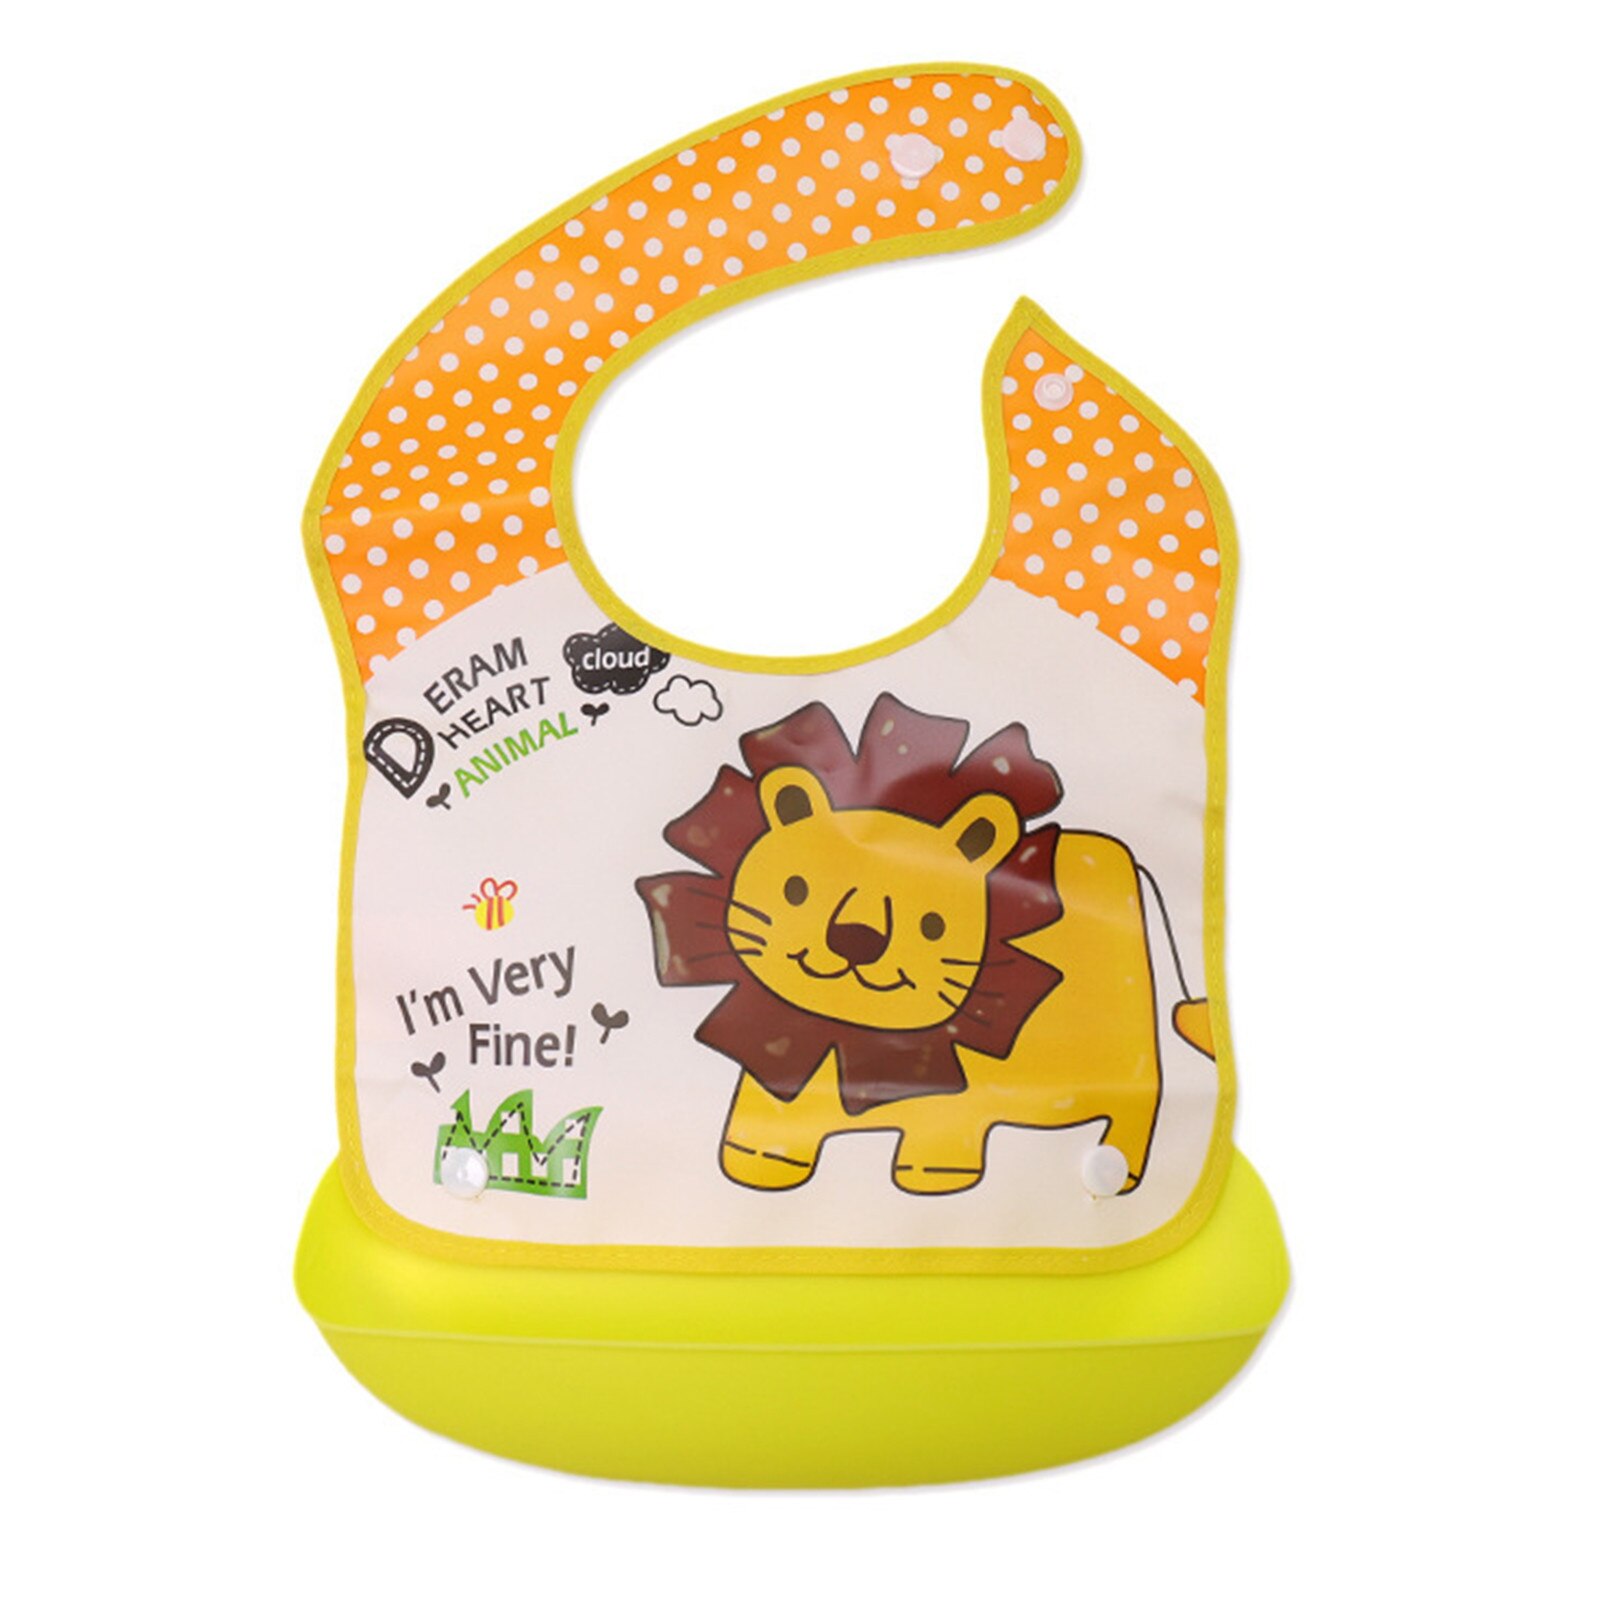 Baby Bib Adjustable Silicone Ssaliva Towel Reusable And Washable Cartoon Bibs With Silicone Food Catcher Children Bib: D